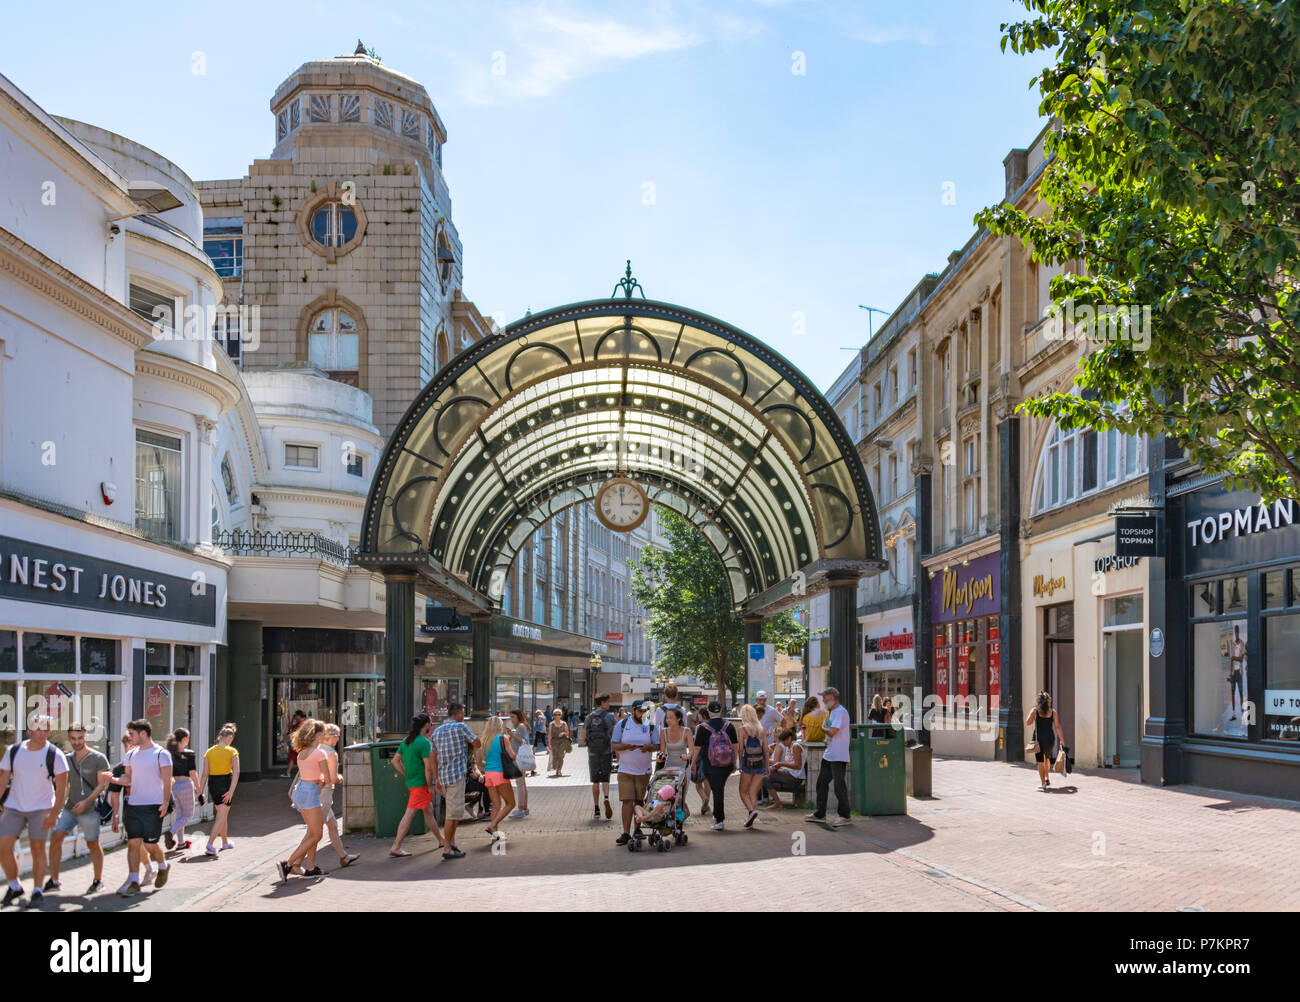 Bournemouth, UK. 7th July 2018. Shopping in Bournemouth during the July heatwave. Credit: Thomas Faull / Alamy Live News Stock Photo